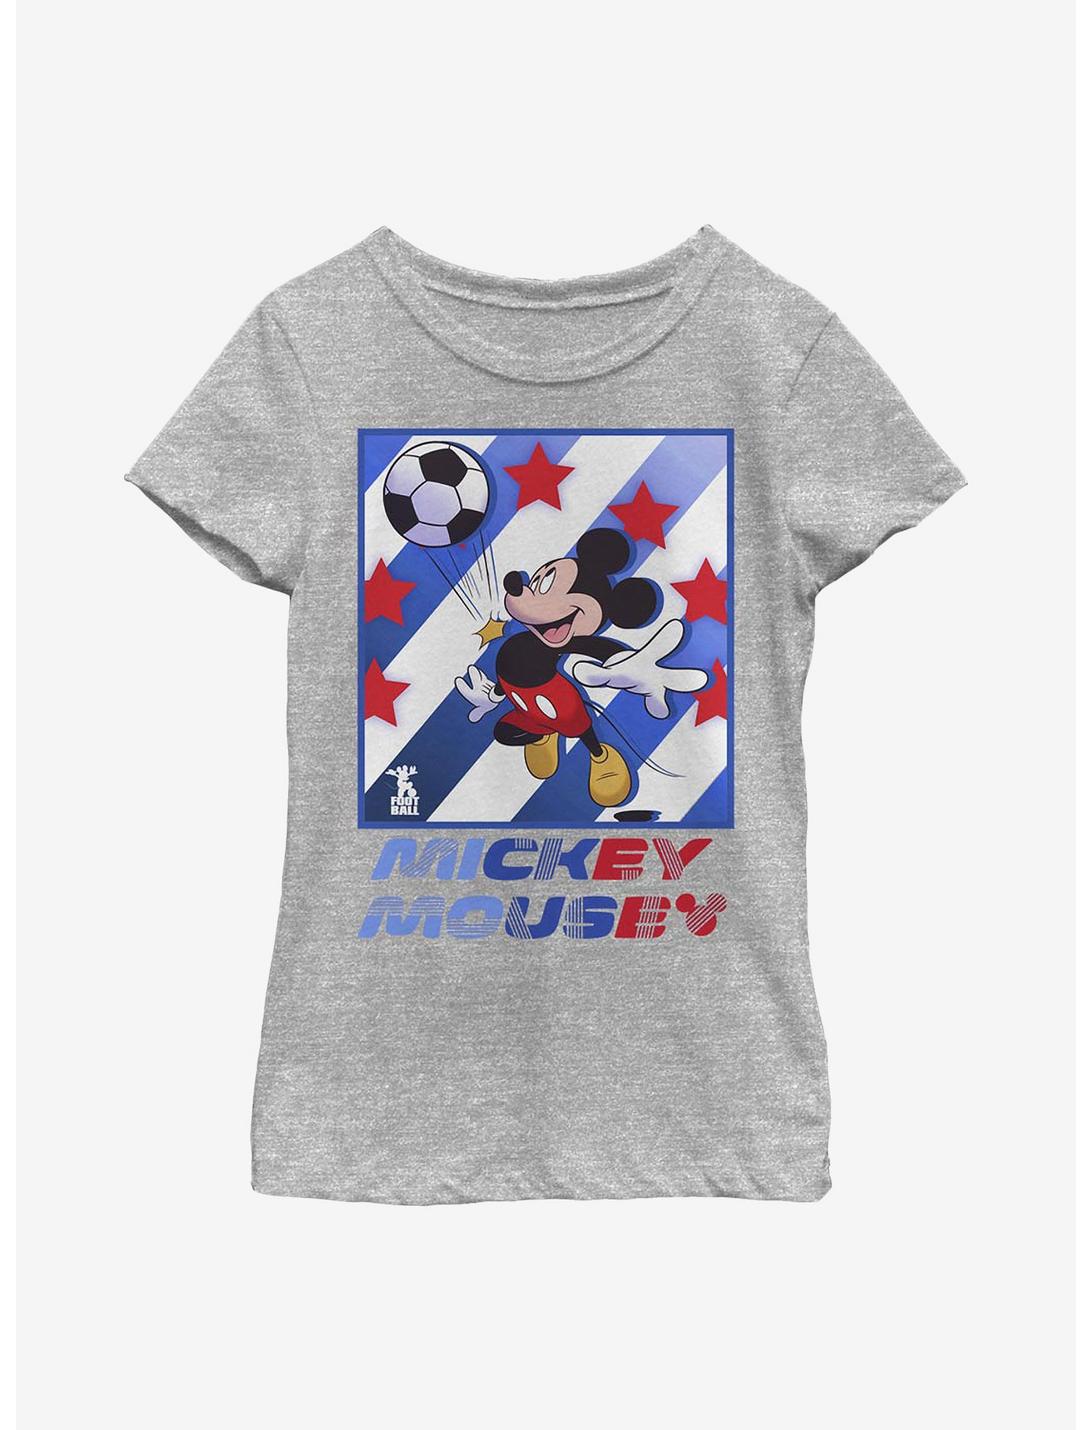 Disney Mickey Mouse Football Star Youth Girls T-Shirt, ATH HTR, hi-res